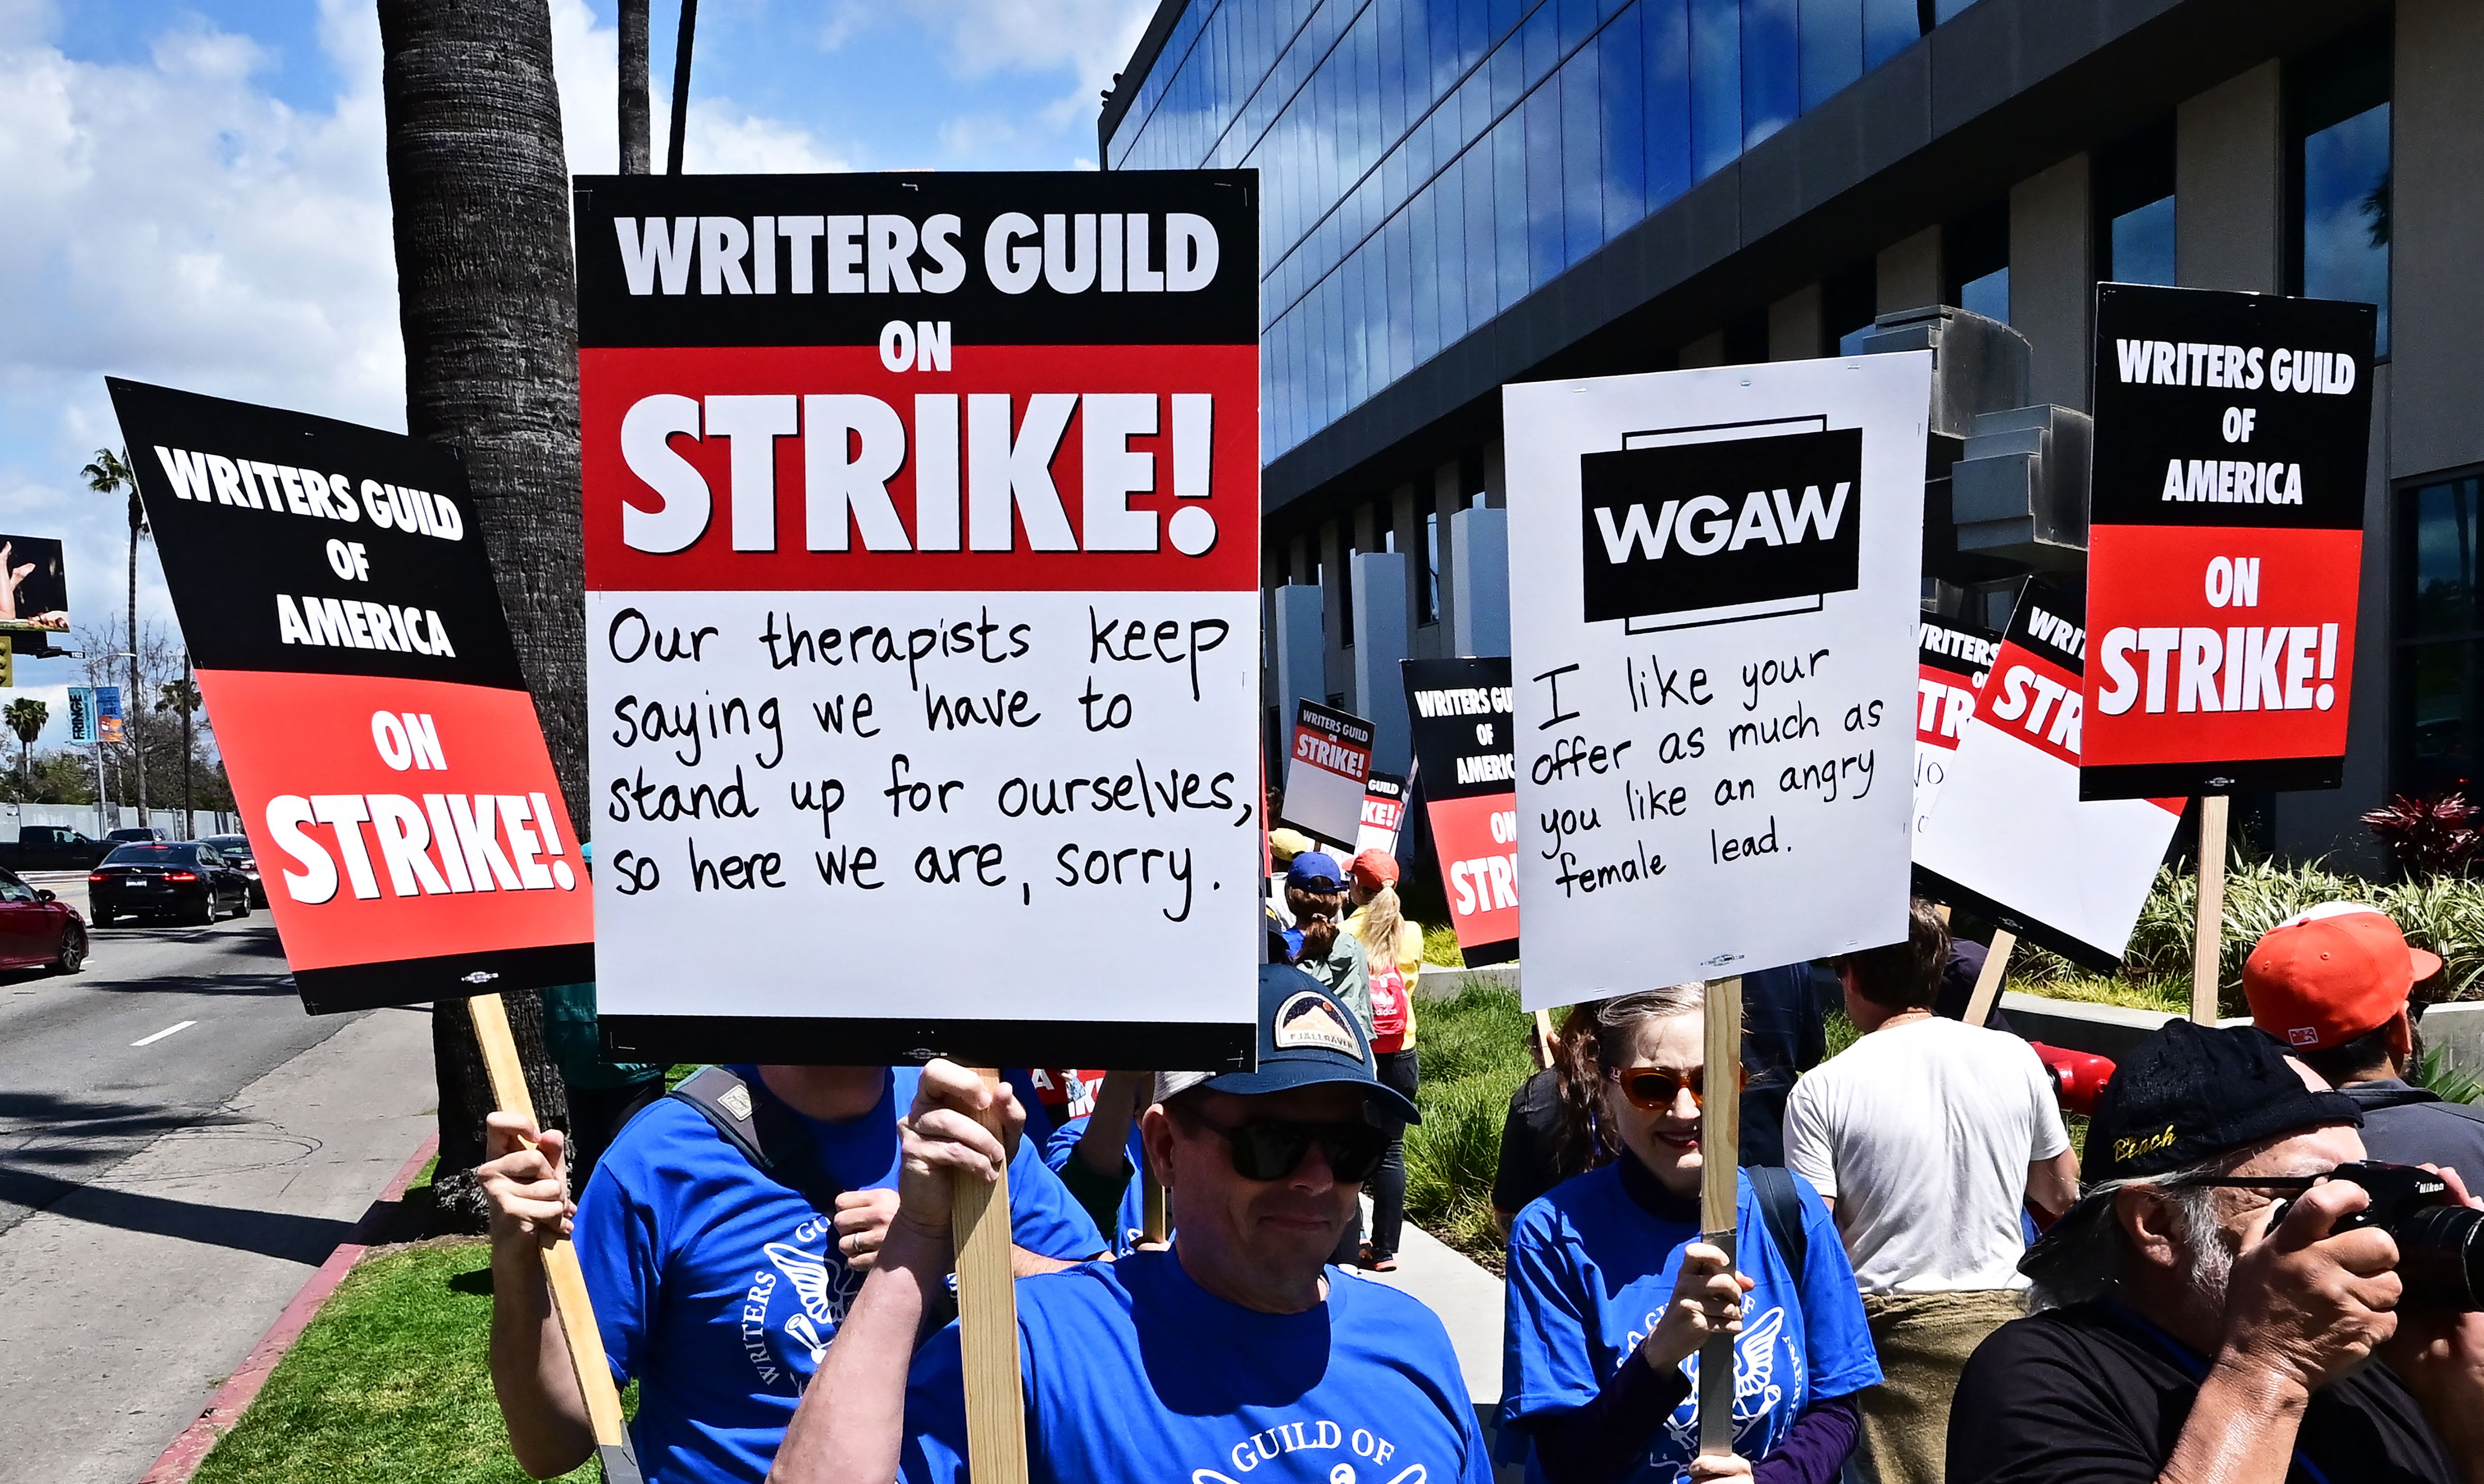 How is SNL affected by WGA strike Saturday Night Live shuts down due